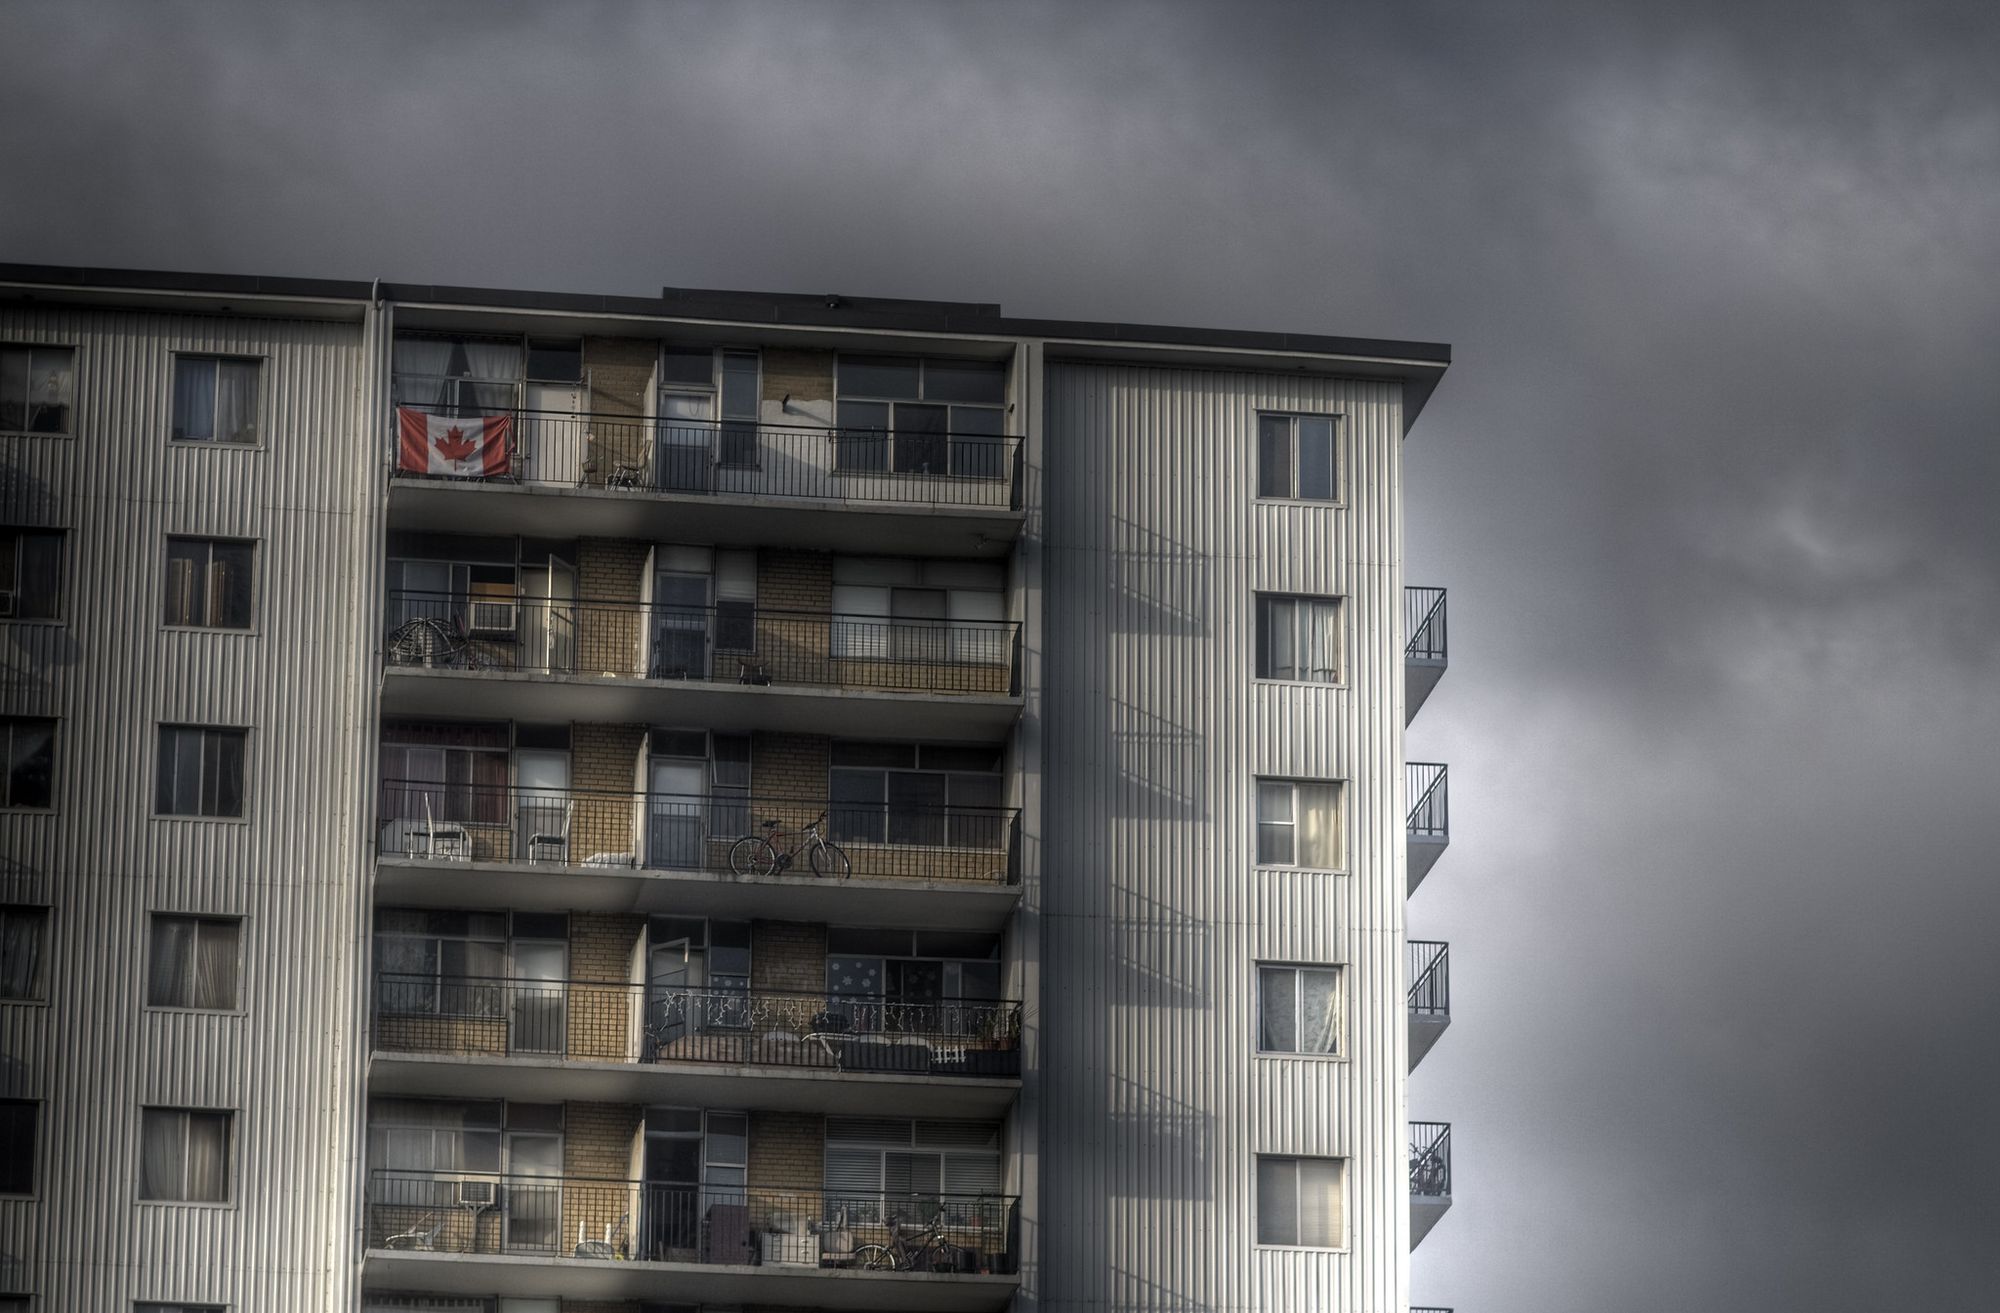 Doug Ford Is Using The Pandemic To Criminalize Tenant Organizing